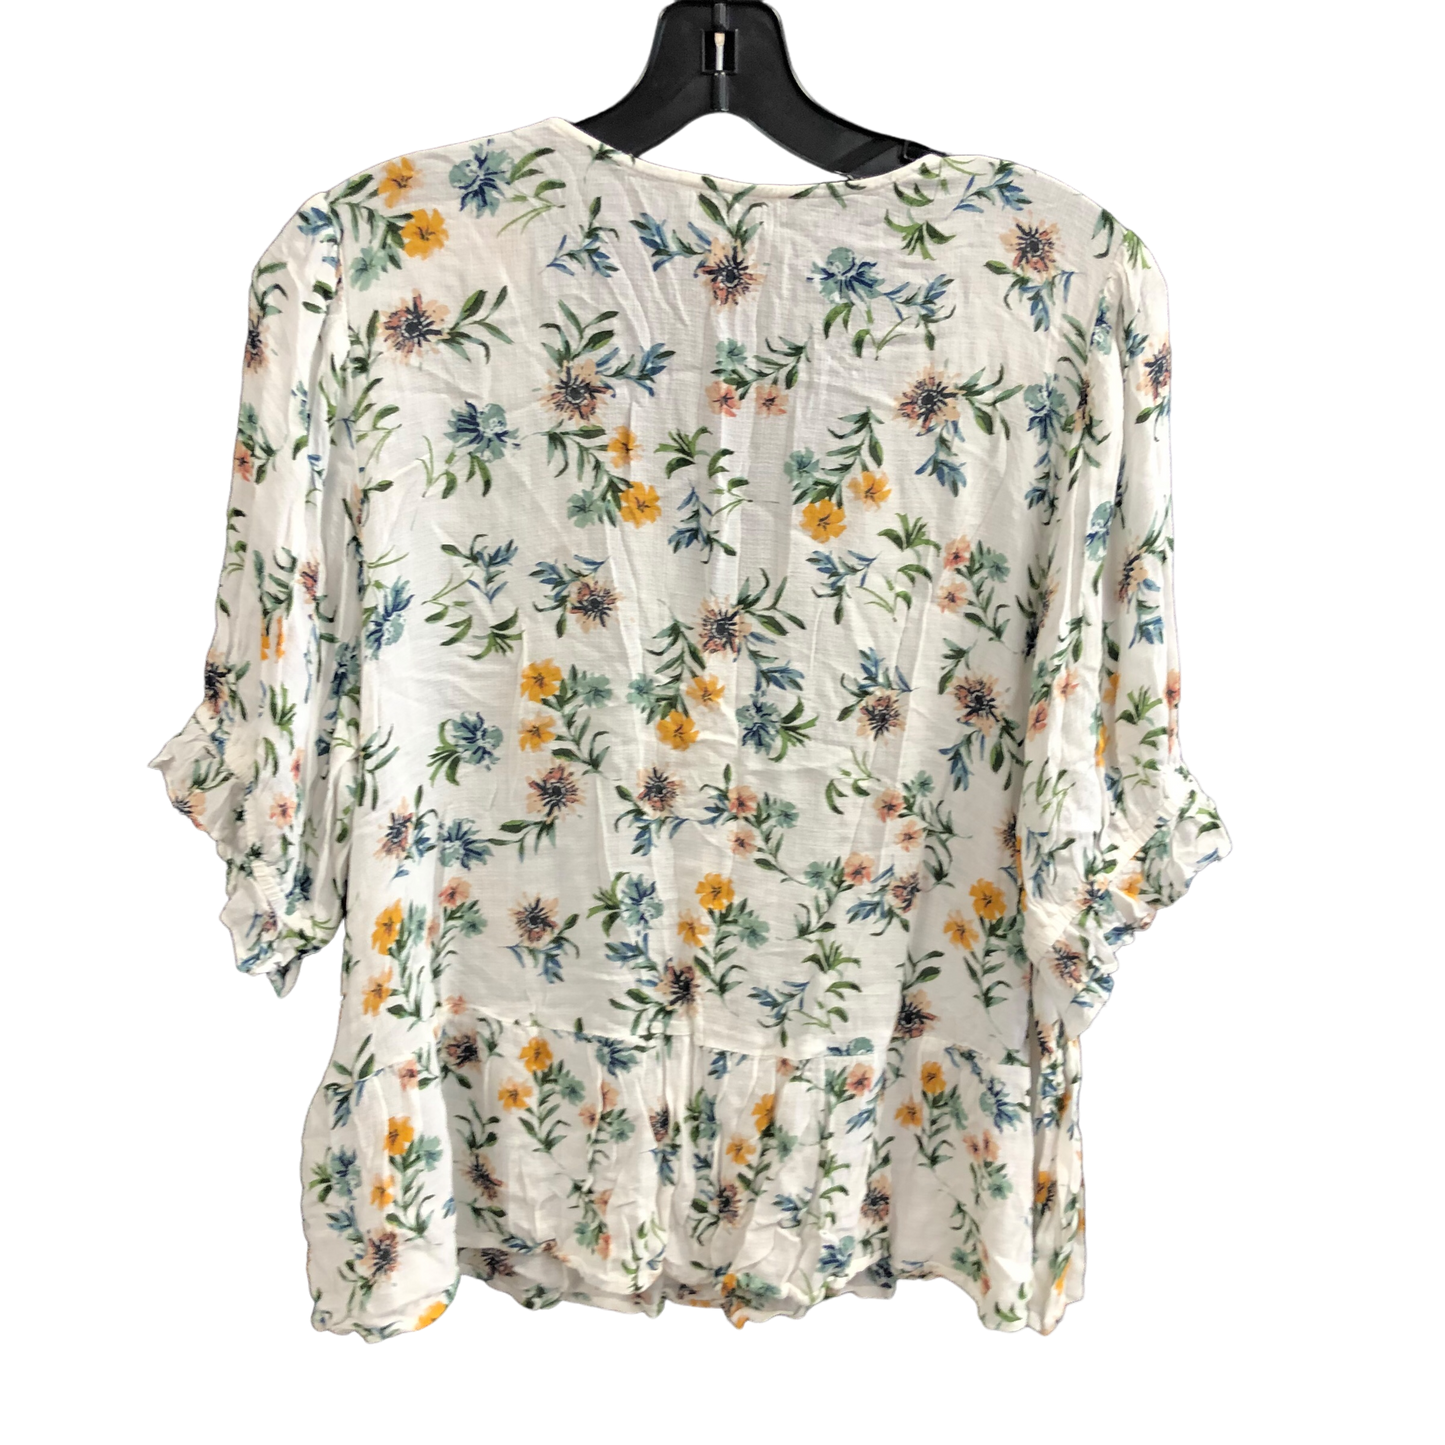 Floral Print Top Short Sleeve Lucky Brand, Size L